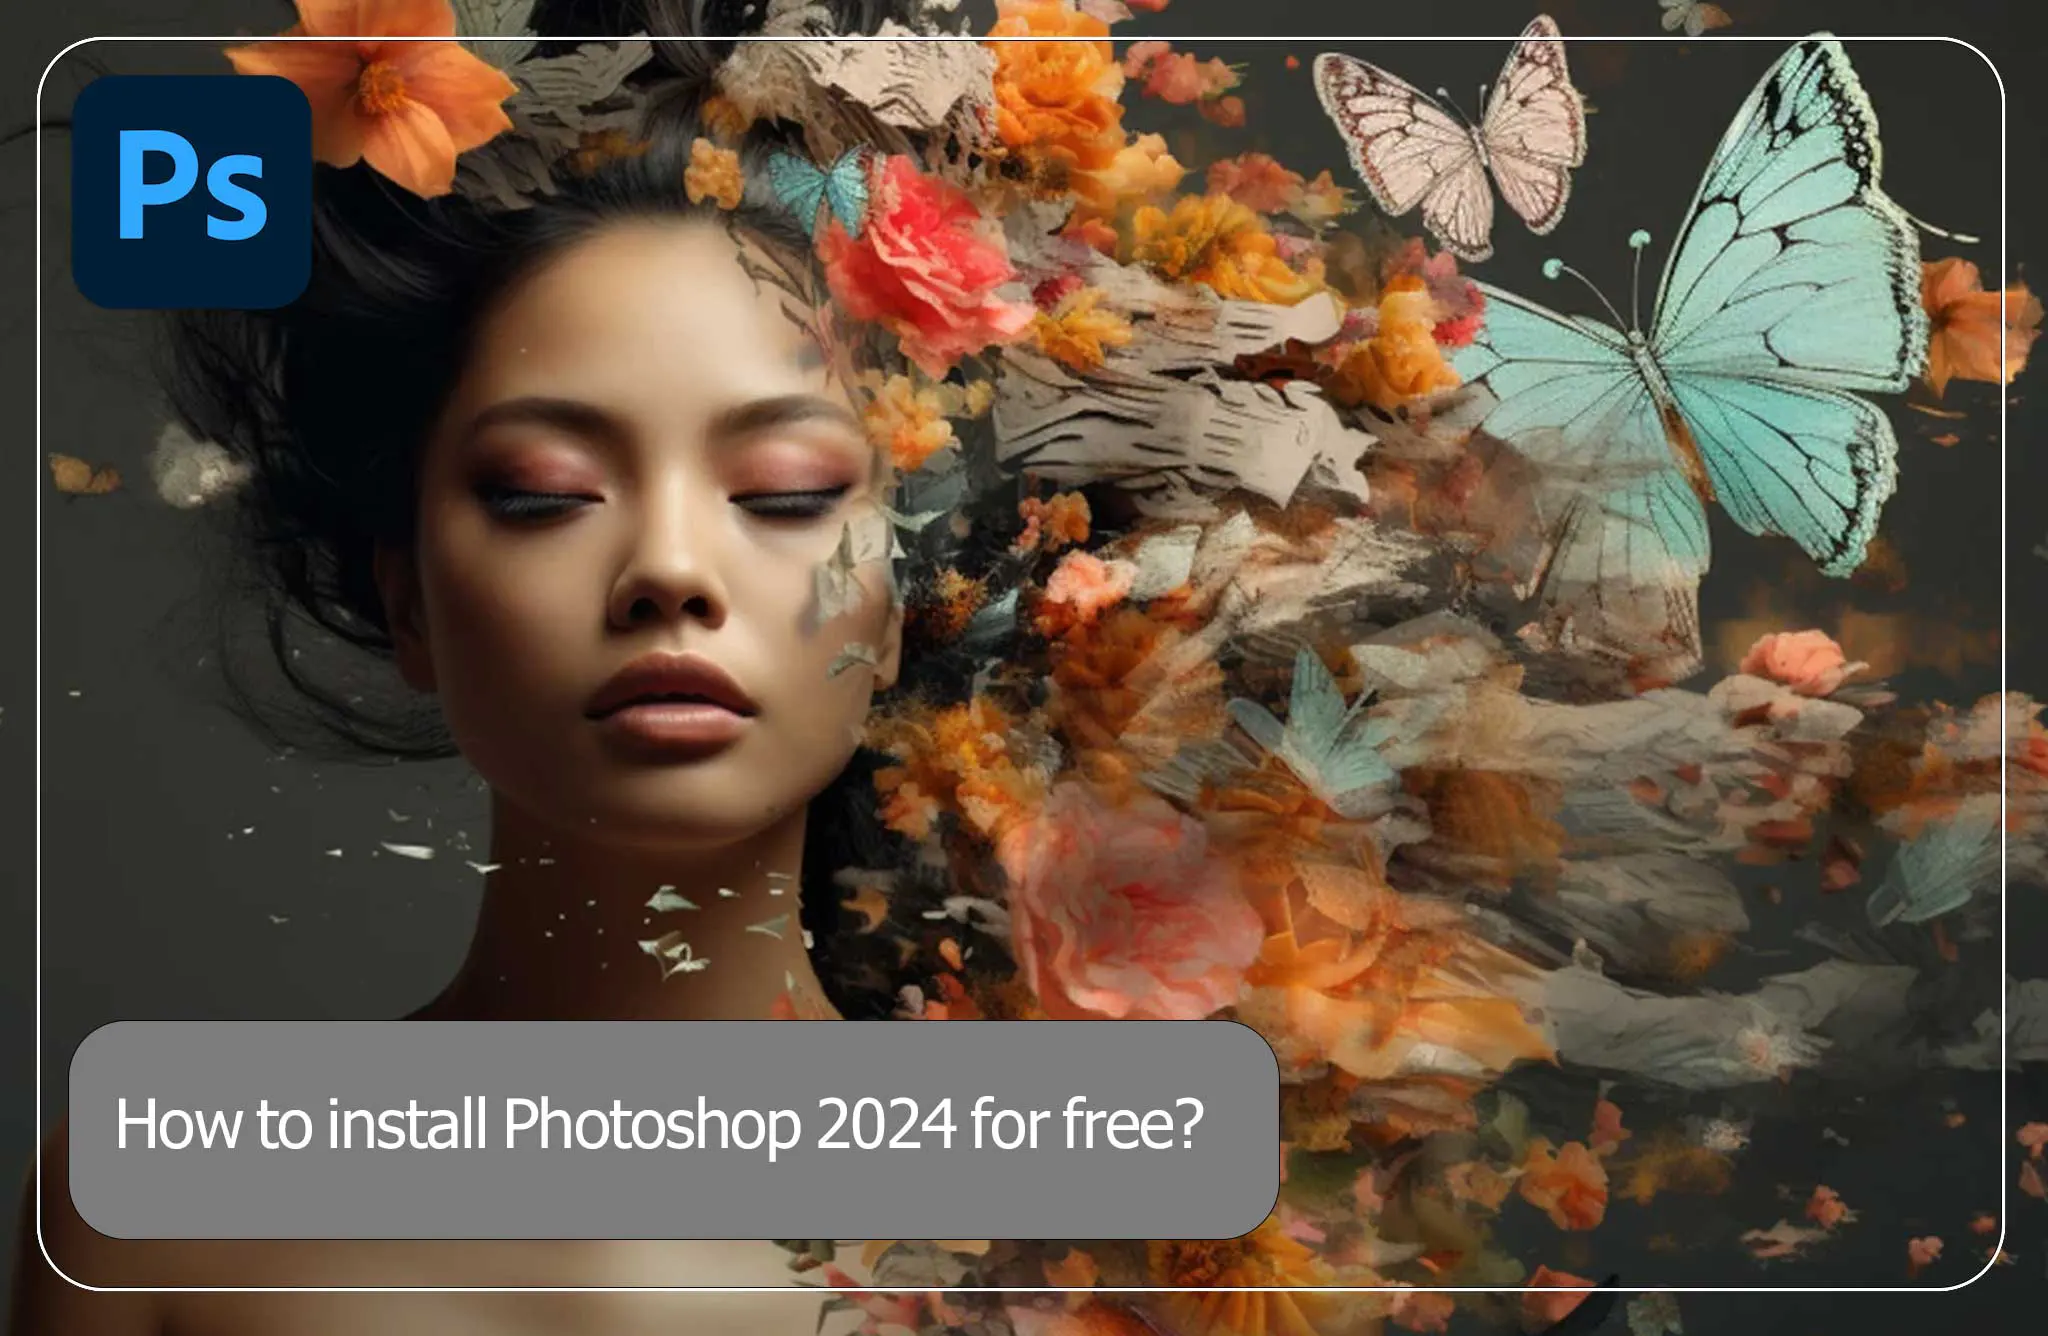 How to install Photoshop 2024 for free?